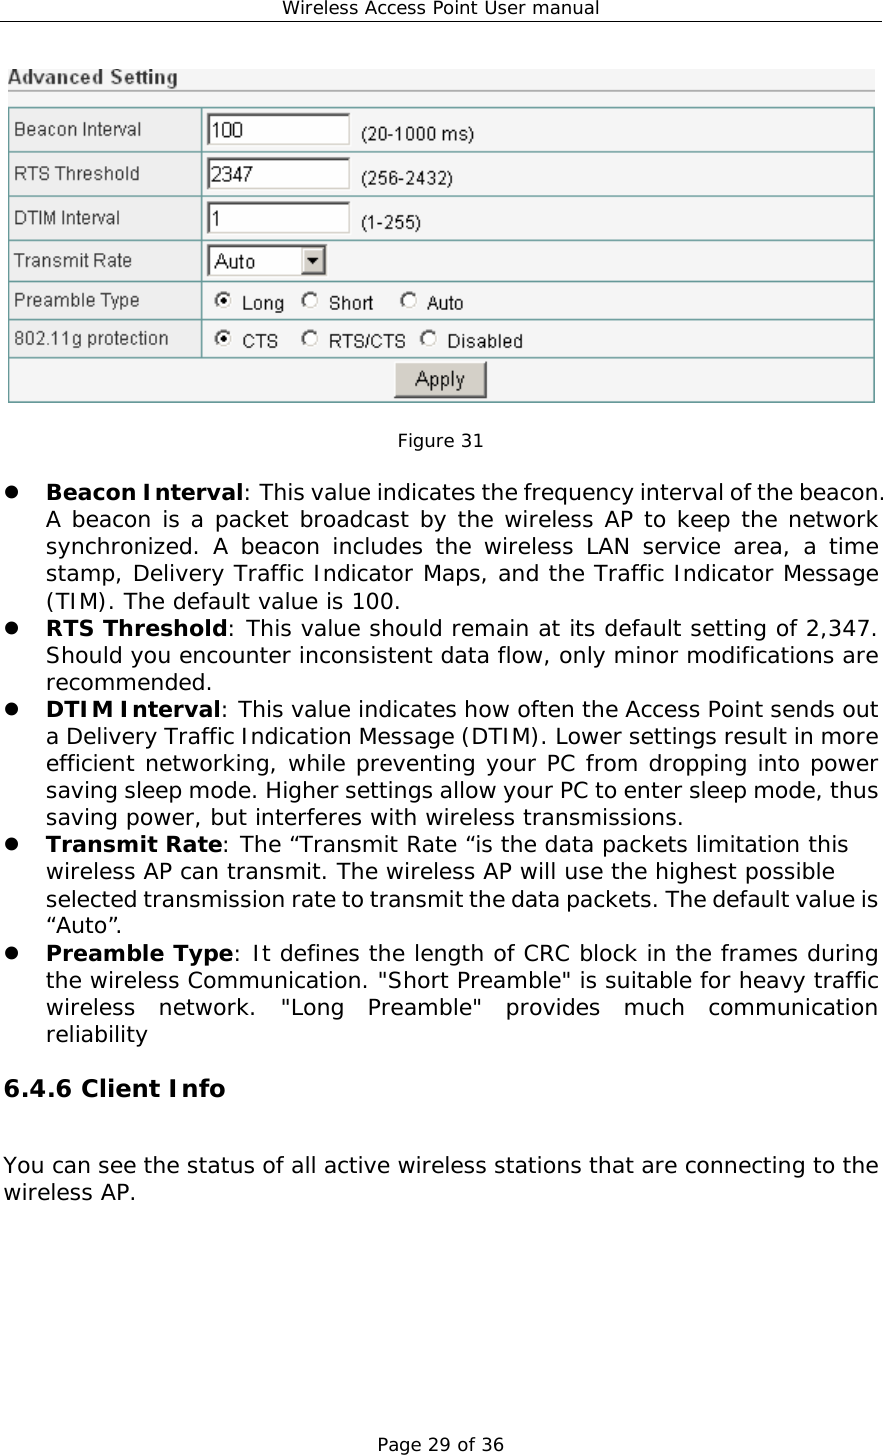 Wireless Access Point User manual Page 29 of 36   Figure 31  z Beacon Interval: This value indicates the frequency interval of the beacon. A beacon is a packet broadcast by the wireless AP to keep the network synchronized. A beacon includes the wireless LAN service area, a time stamp, Delivery Traffic Indicator Maps, and the Traffic Indicator Message (TIM). The default value is 100. z RTS Threshold: This value should remain at its default setting of 2,347. Should you encounter inconsistent data flow, only minor modifications are recommended. z DTIM Interval: This value indicates how often the Access Point sends out a Delivery Traffic Indication Message (DTIM). Lower settings result in more efficient networking, while preventing your PC from dropping into power saving sleep mode. Higher settings allow your PC to enter sleep mode, thus saving power, but interferes with wireless transmissions.  z Transmit Rate: The “Transmit Rate “is the data packets limitation this wireless AP can transmit. The wireless AP will use the highest possible selected transmission rate to transmit the data packets. The default value is “Auto”. z Preamble Type: It defines the length of CRC block in the frames during the wireless Communication. &quot;Short Preamble&quot; is suitable for heavy traffic wireless network. &quot;Long Preamble&quot; provides much communication reliability  6.4.6 Client Info You can see the status of all active wireless stations that are connecting to the wireless AP.   